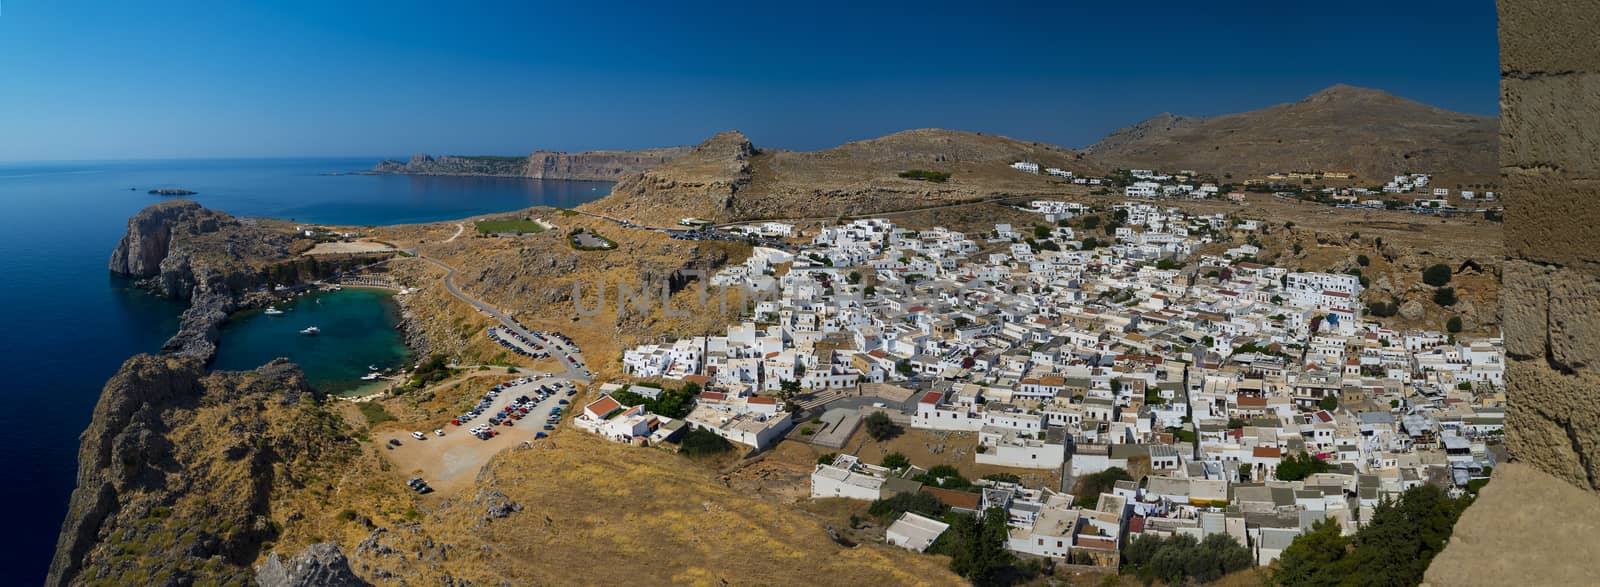 Beautiful blue-green bay seen fromthe heights of the Acropolis of Lindos